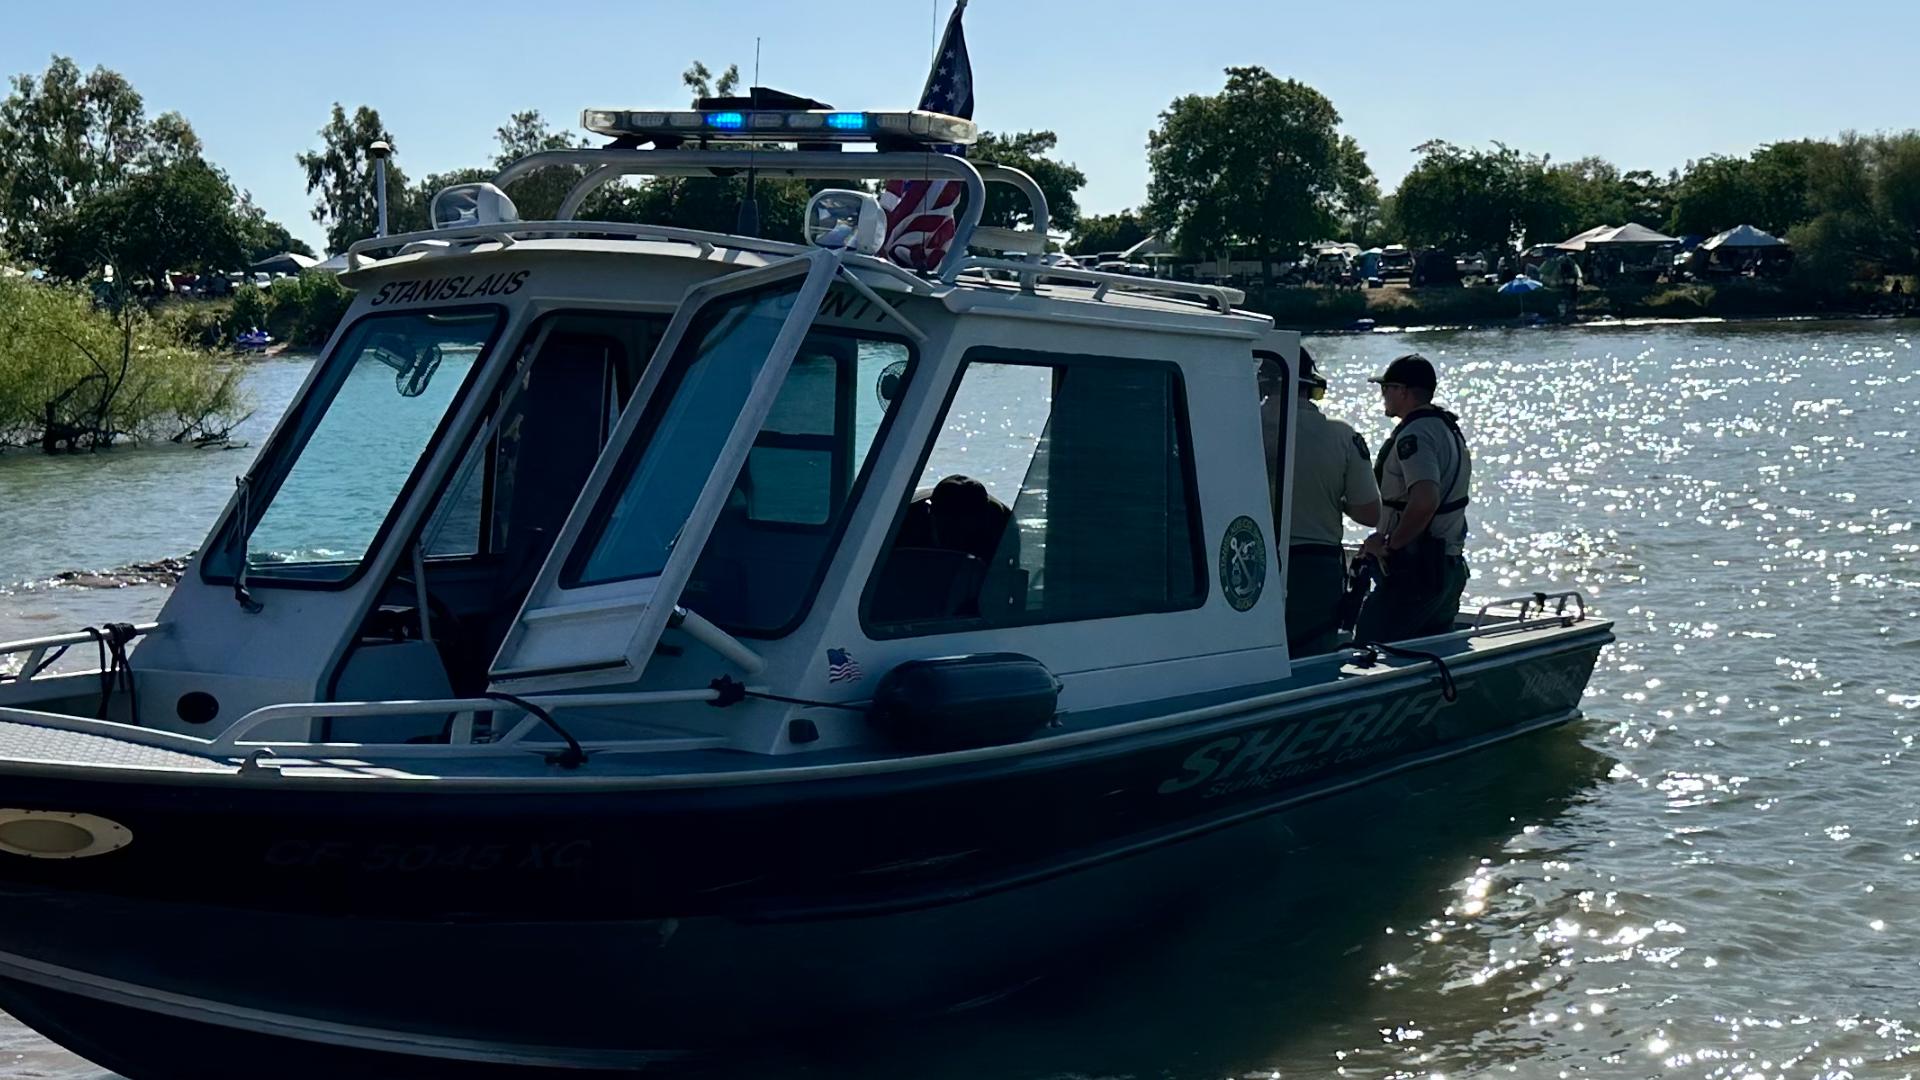 The search for a missing swimmer at Woodward Reservoir came to a tragic end Sunday evening.